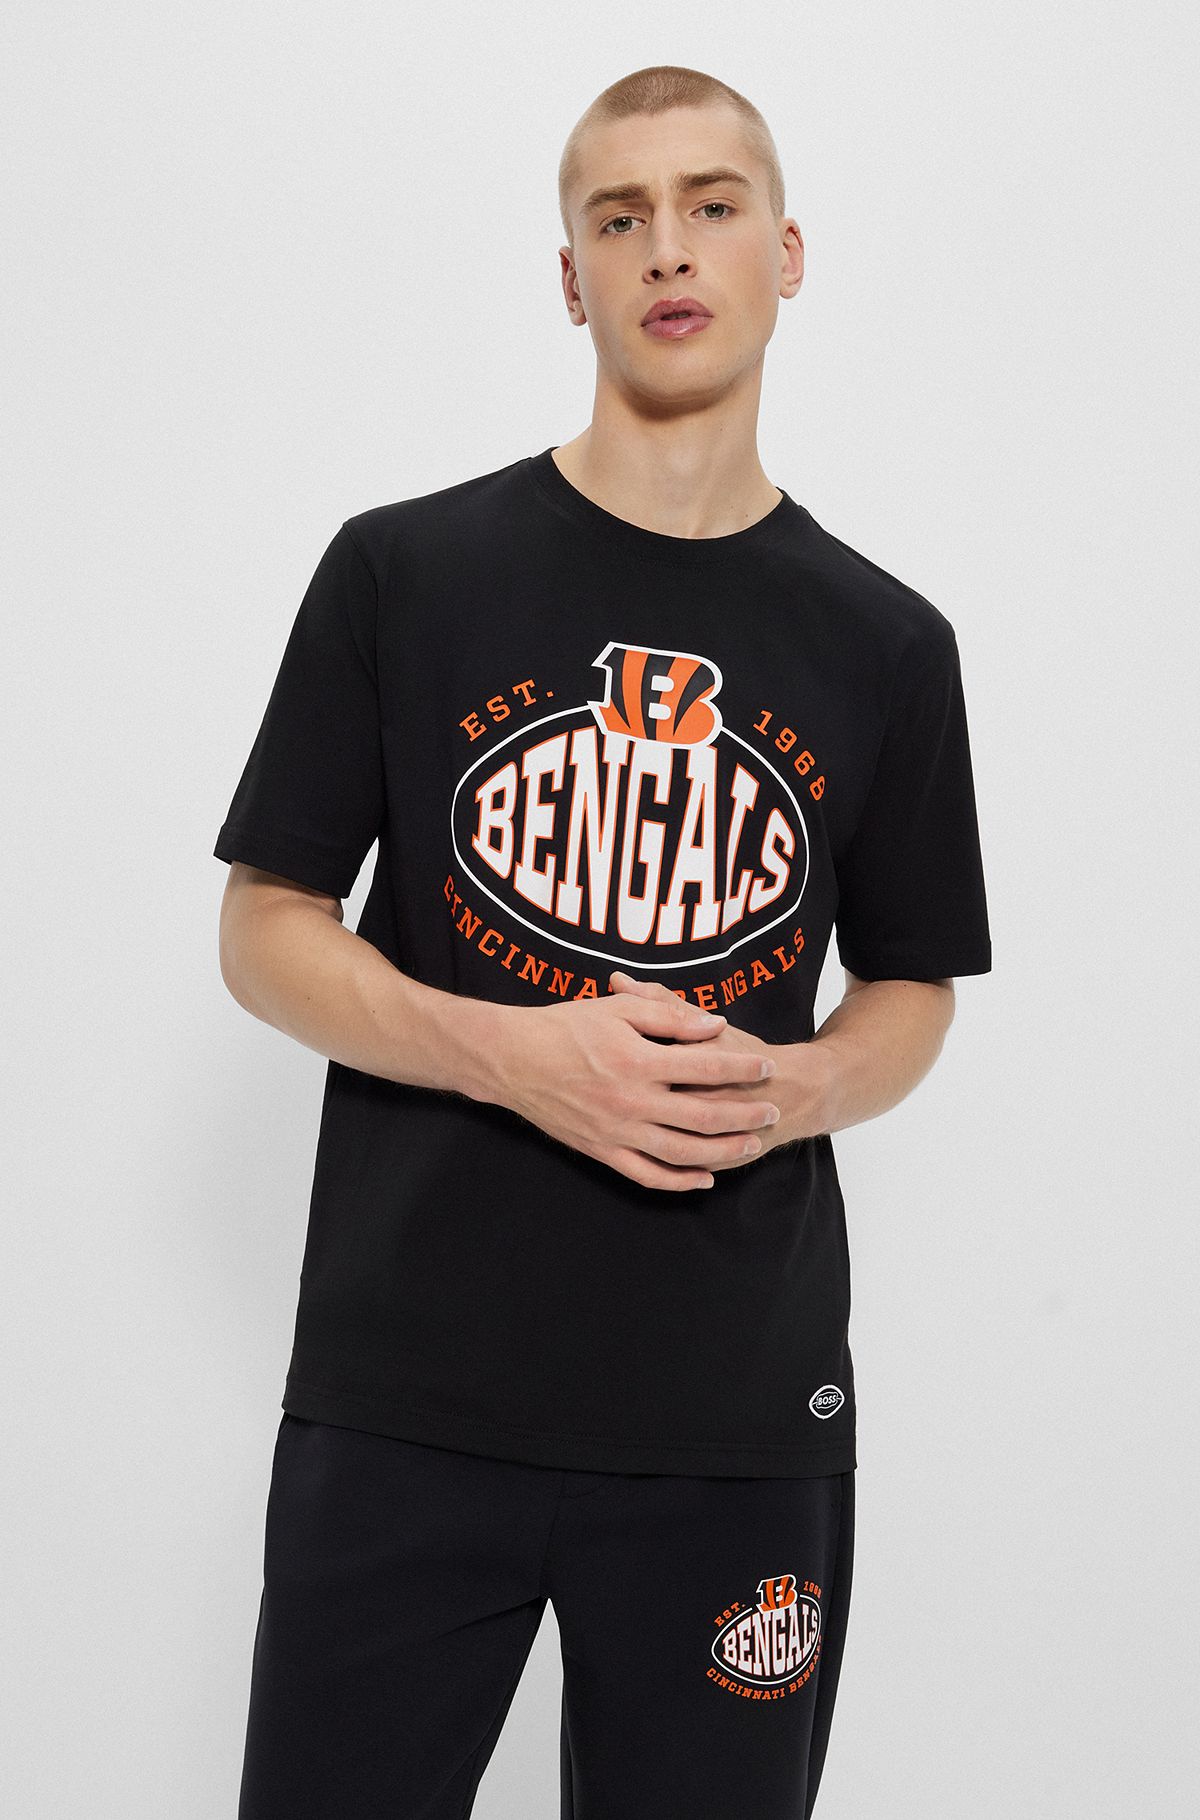  BOSS x NFL stretch-cotton T-shirt with collaborative branding, Bengals